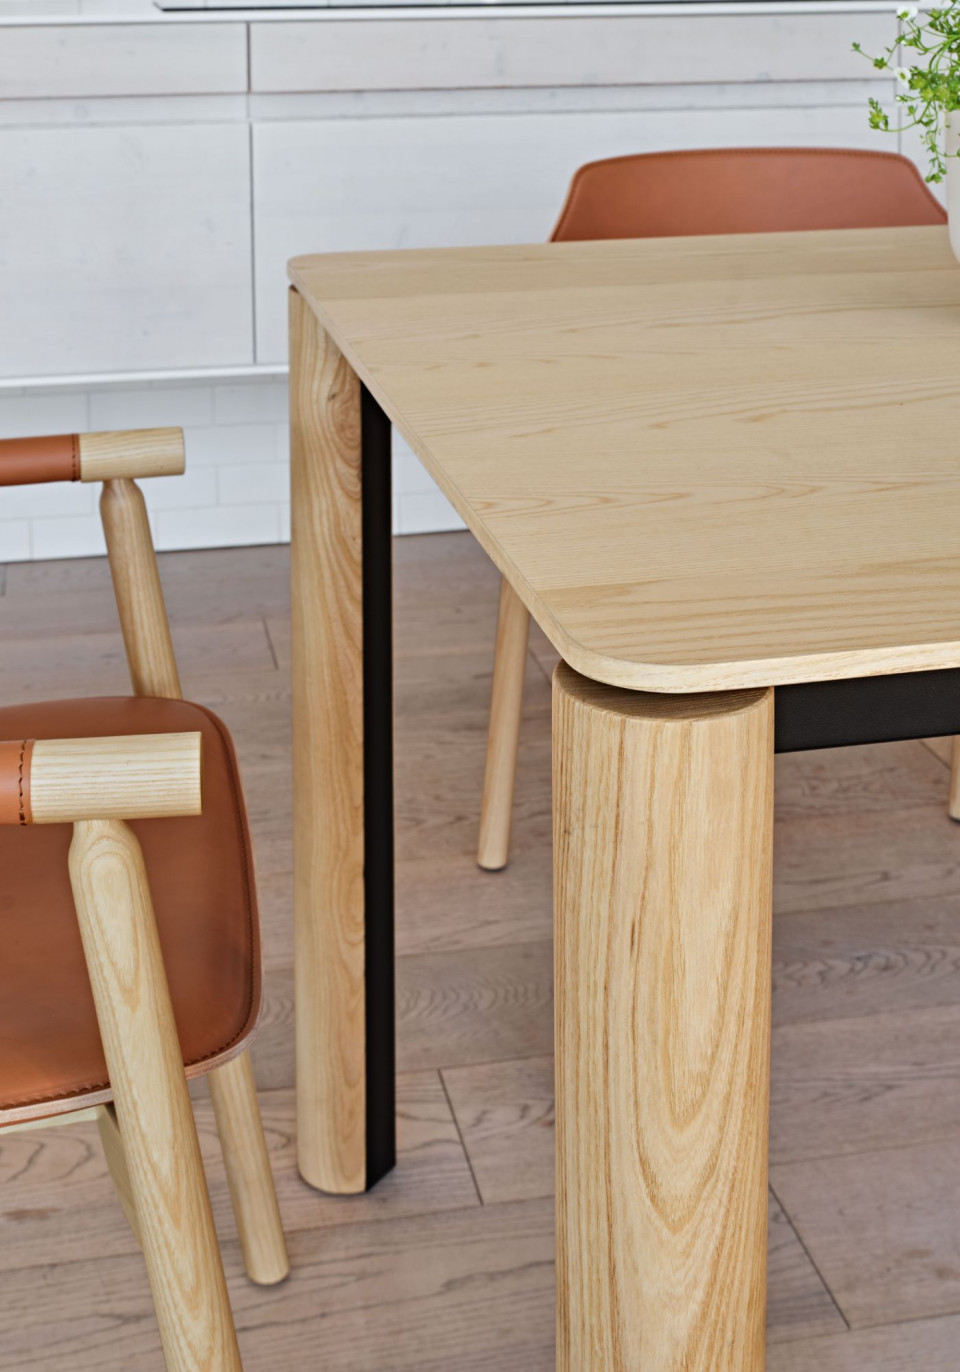 Woody fixed table by Midj